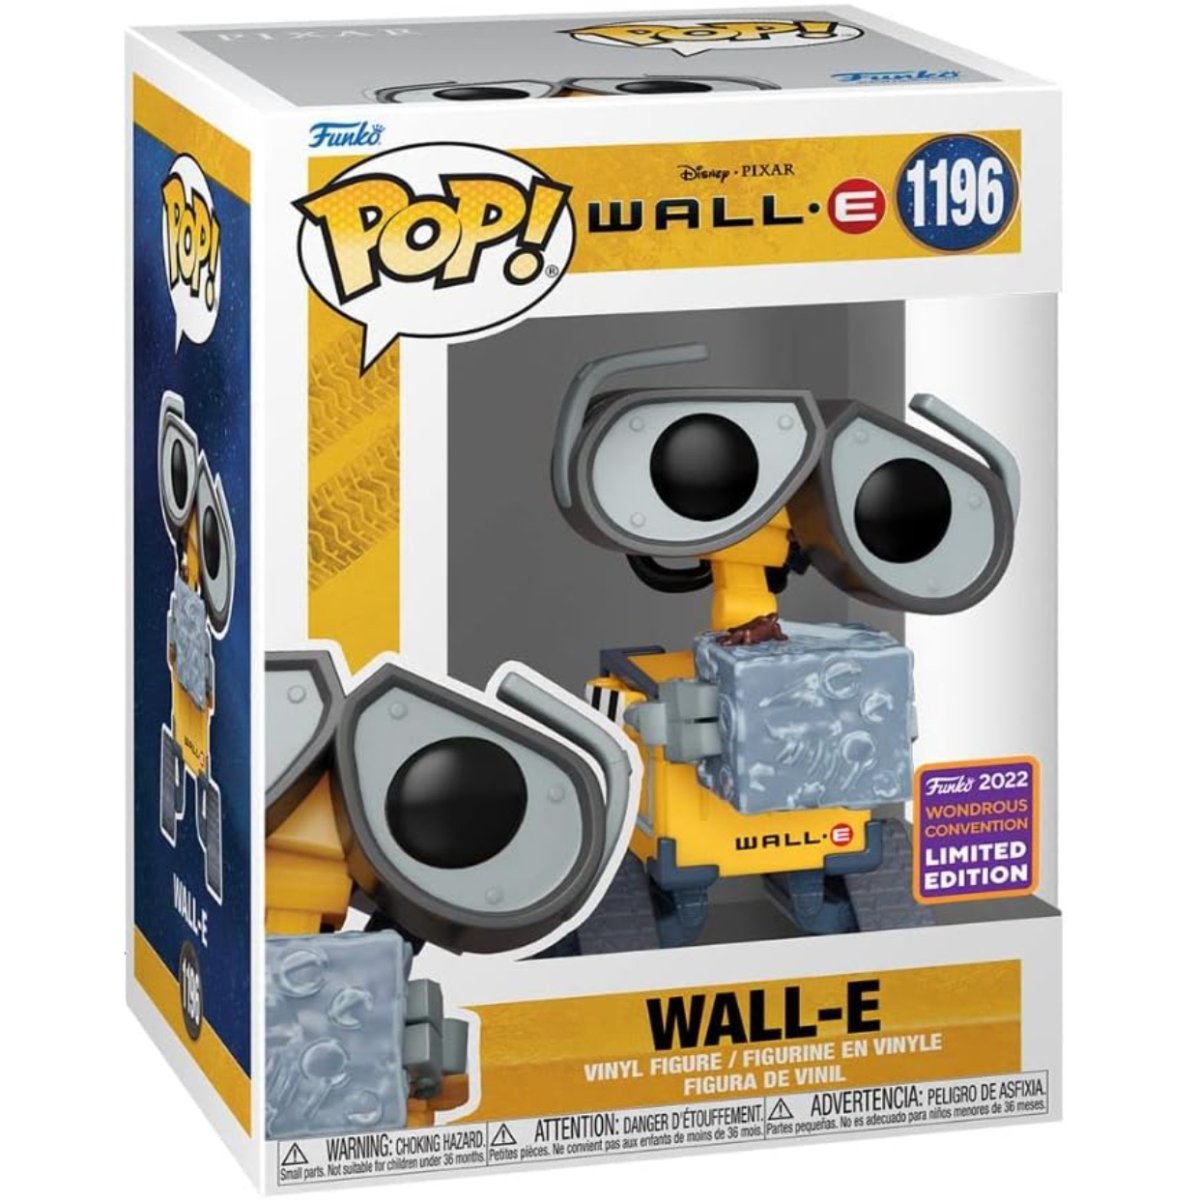 Wall-E - Wall-E [with Trash Cube] (Wondrous Convention Limited Edition) #1196 - Funko Pop! Vinyl Disney - Persona Toys